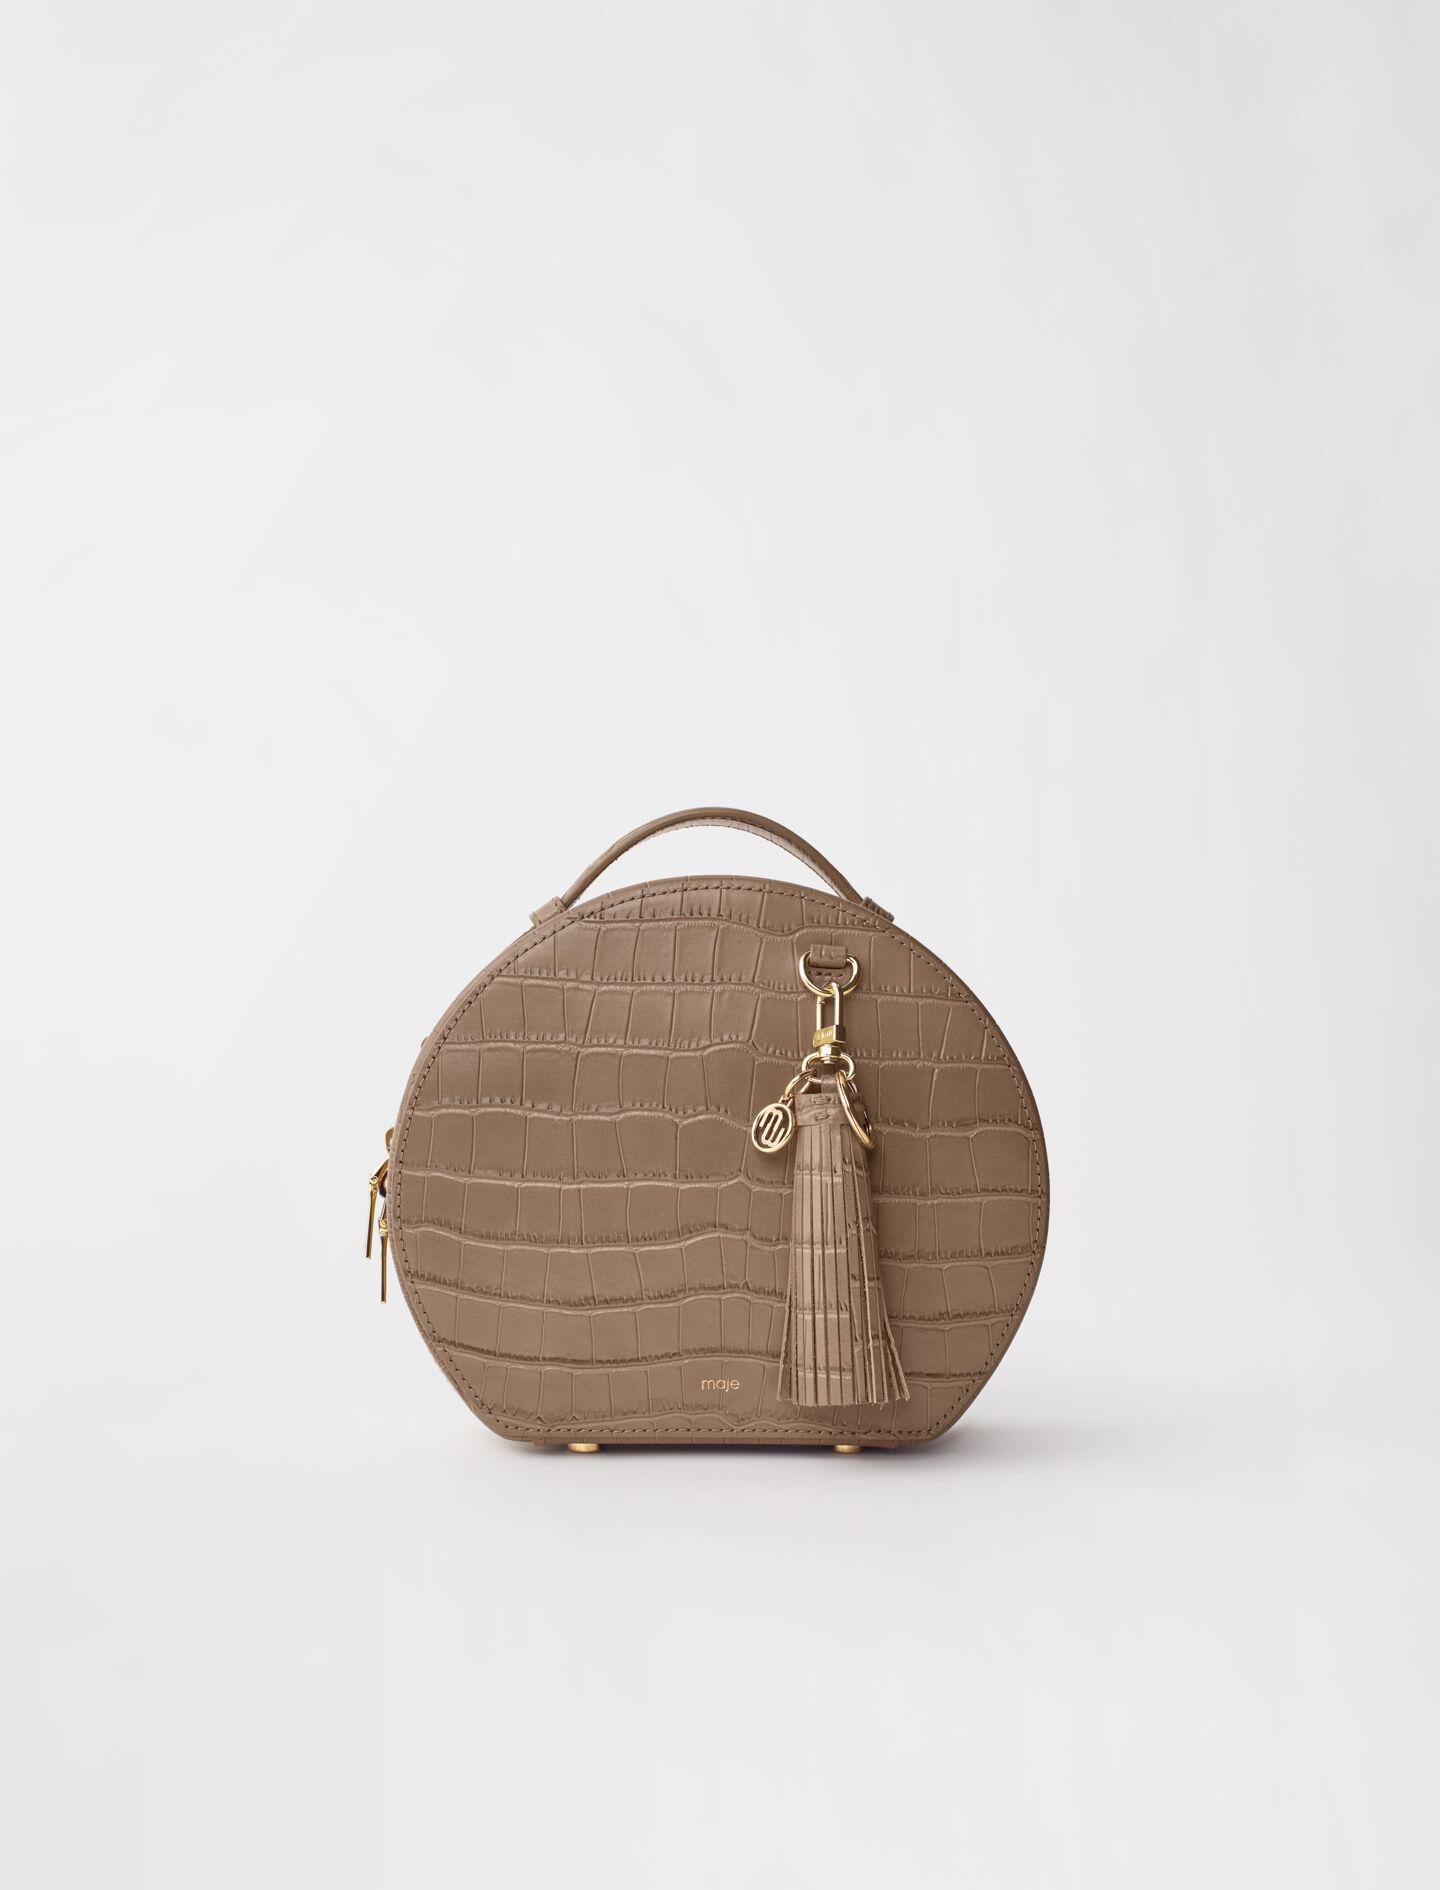 Maje Croc-effect Embossed Round Leather Bag in Mole (Brown) | Lyst UK